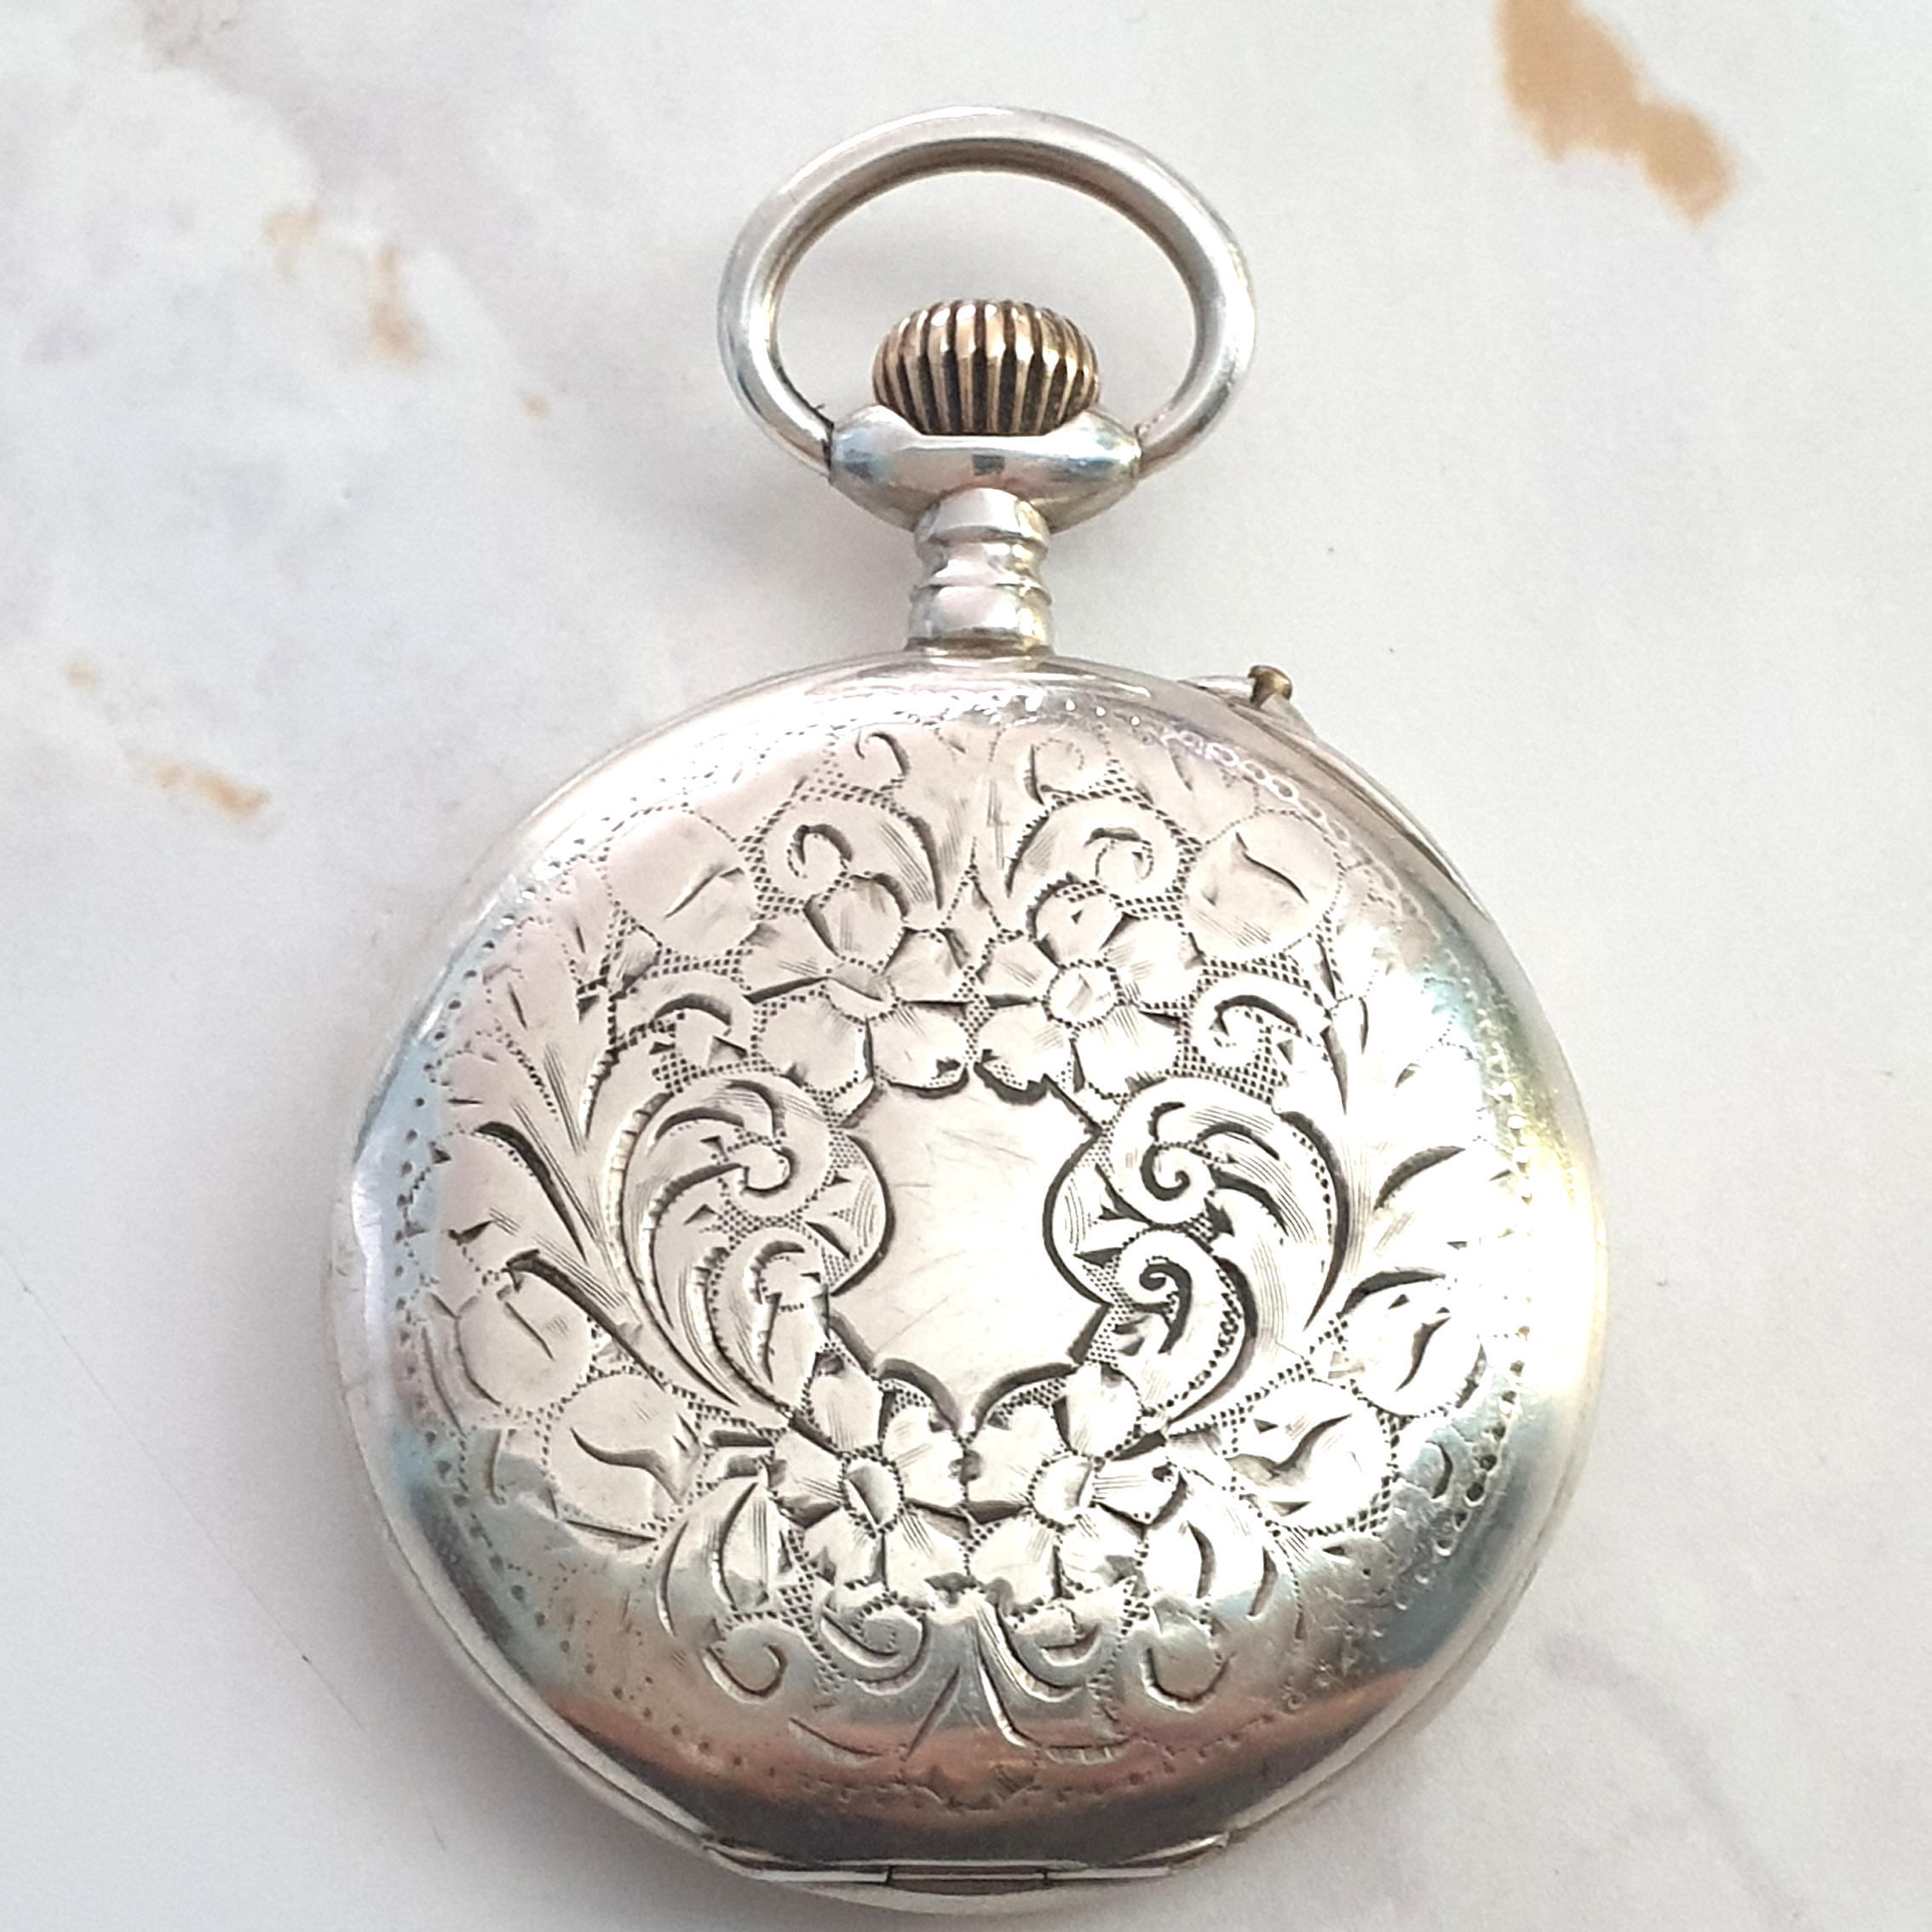 8 DAY HEBDOMAS TOP WIND POCKET WATCH WITH ENAMELLED DIAL AND VISIBLE ESCAPEMENT IN STERLING SILVER - Image 9 of 13